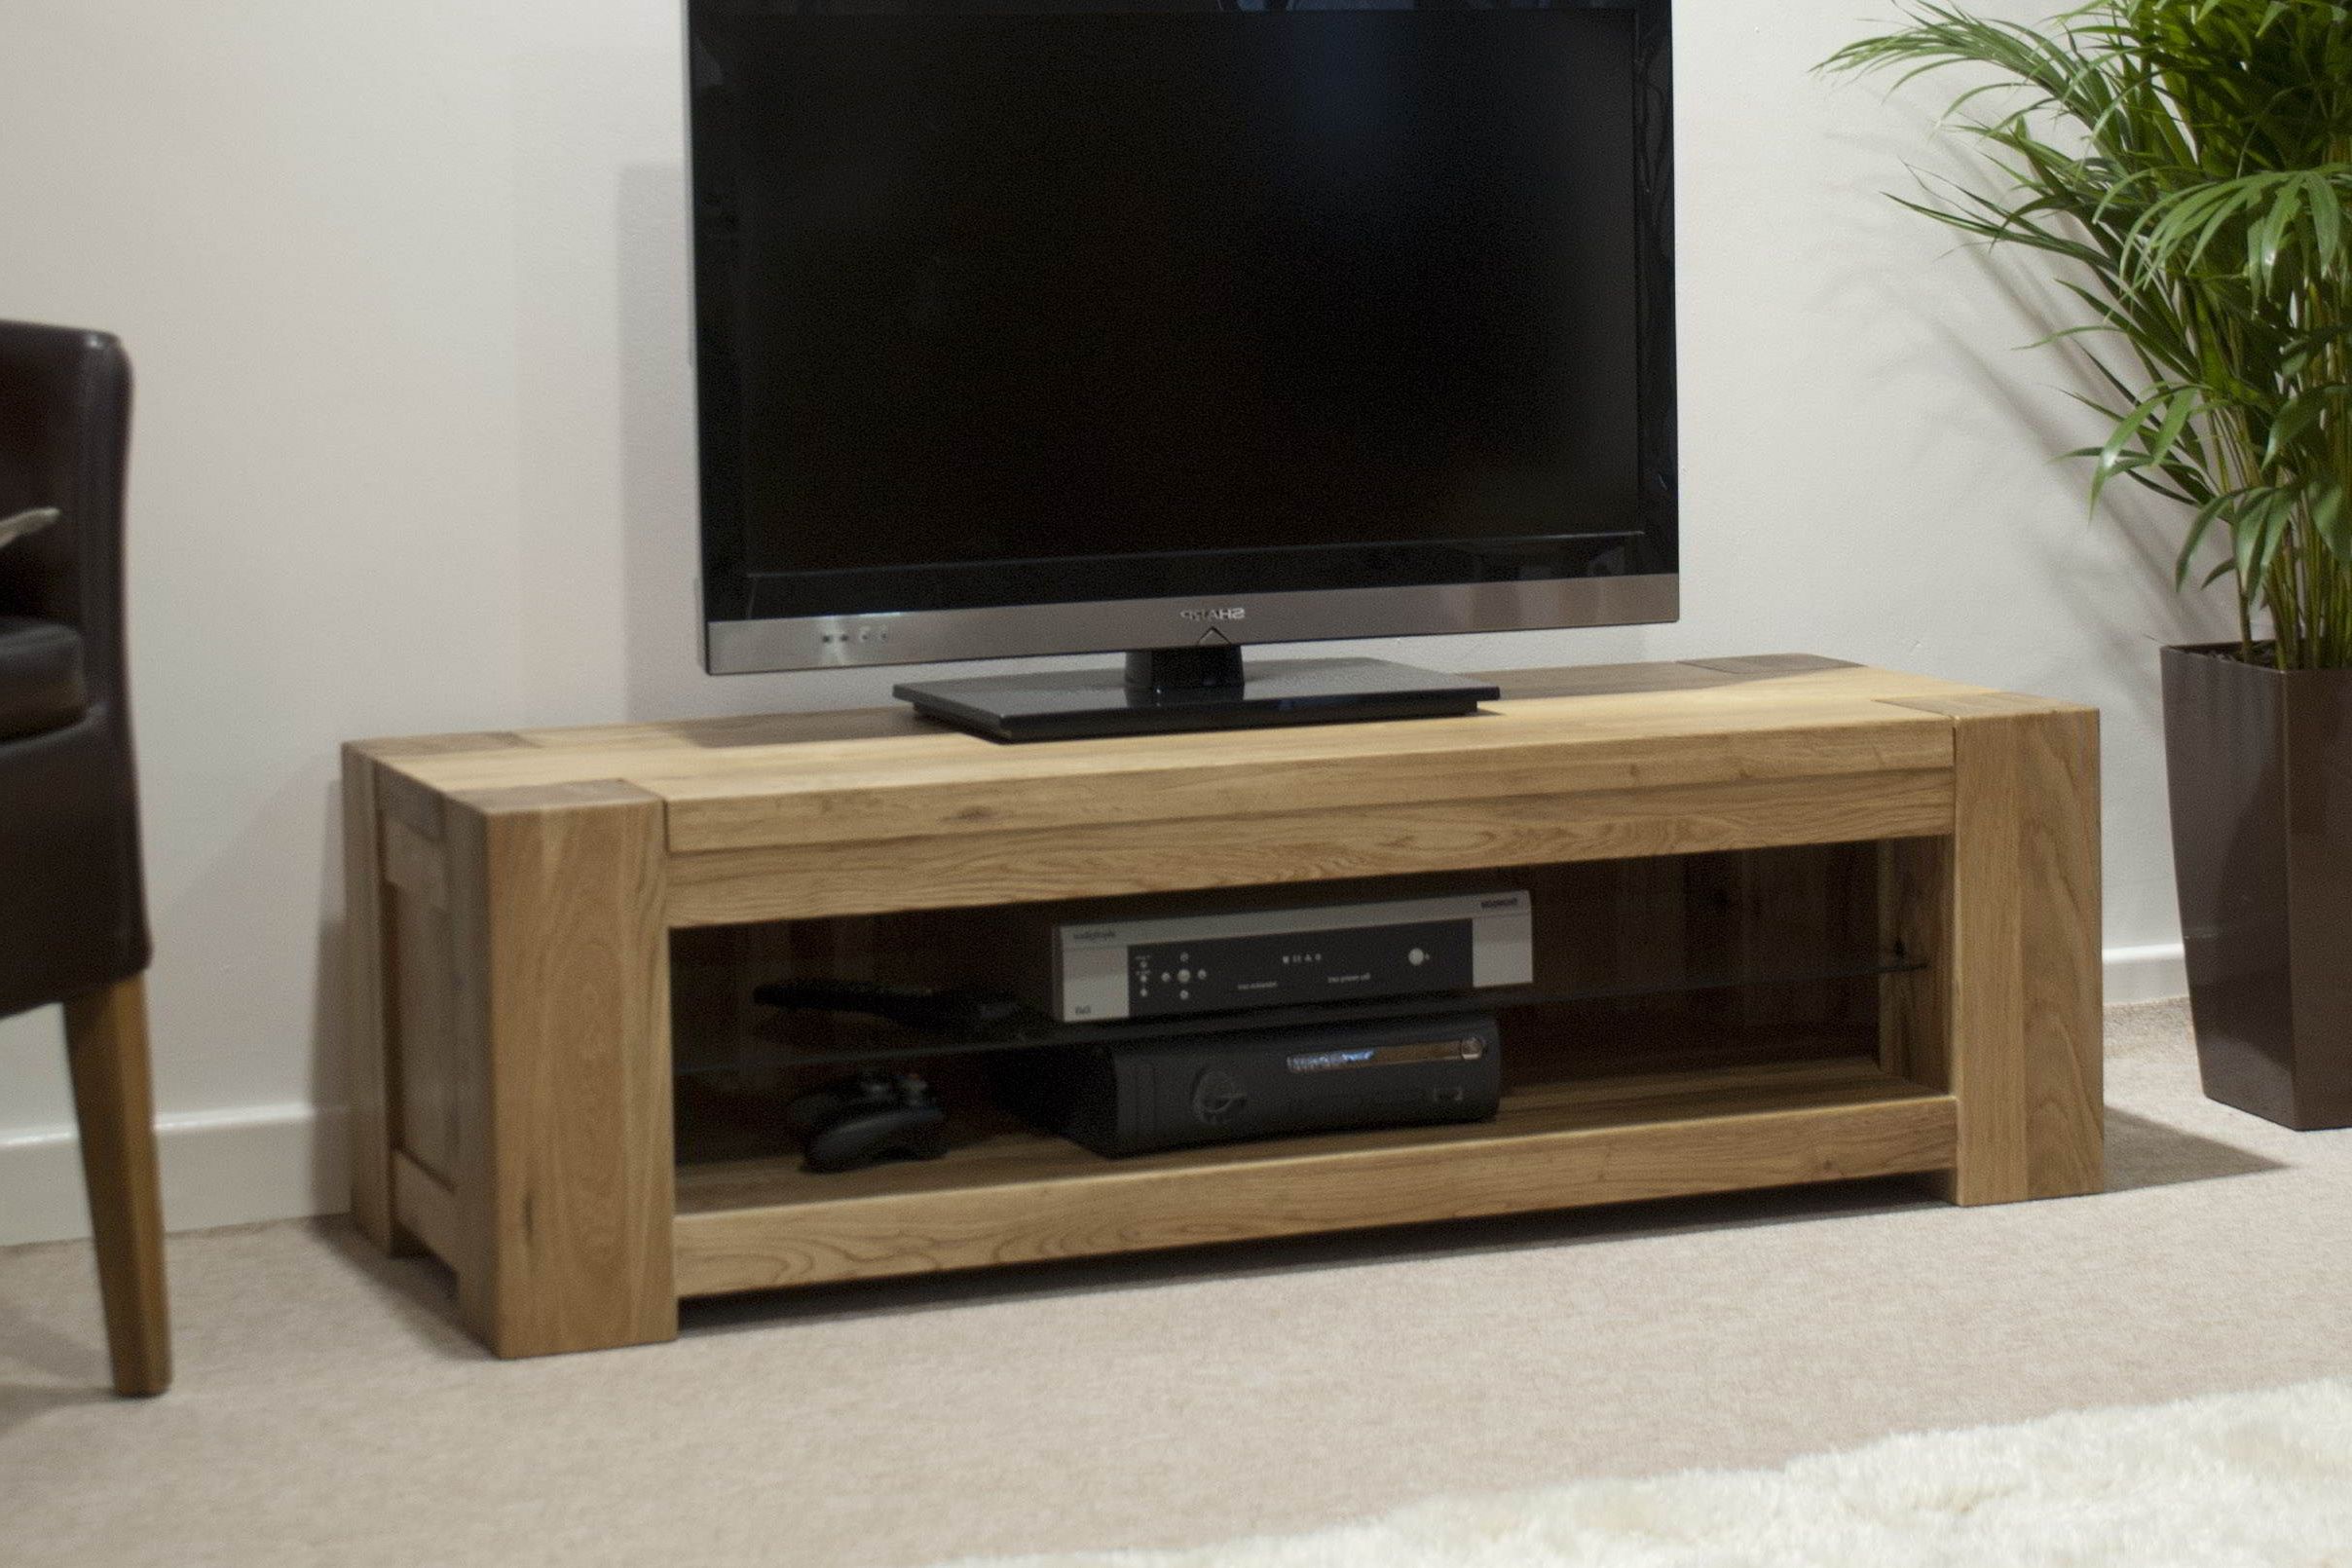 Contemporary Oak Tv Cabinets Cozy Popular 2415×1610 Attachment Intended For Well Known Contemporary Oak Tv Cabinets (View 6 of 20)